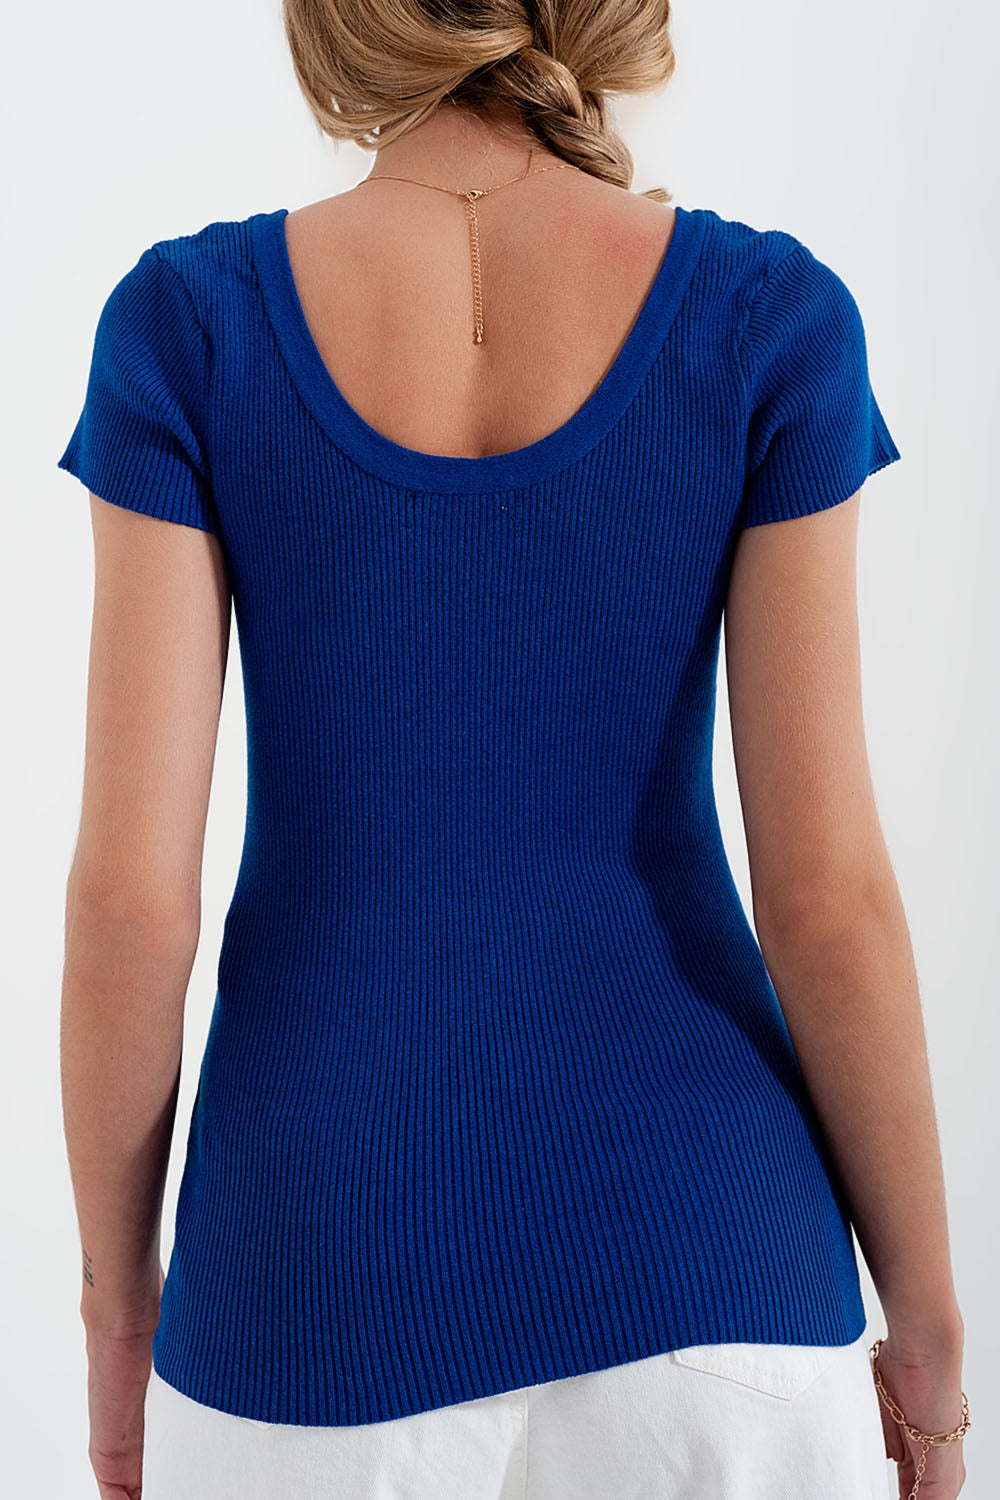 Q2-Knitted fit rib crew neck sweater in Blue-Sweaters